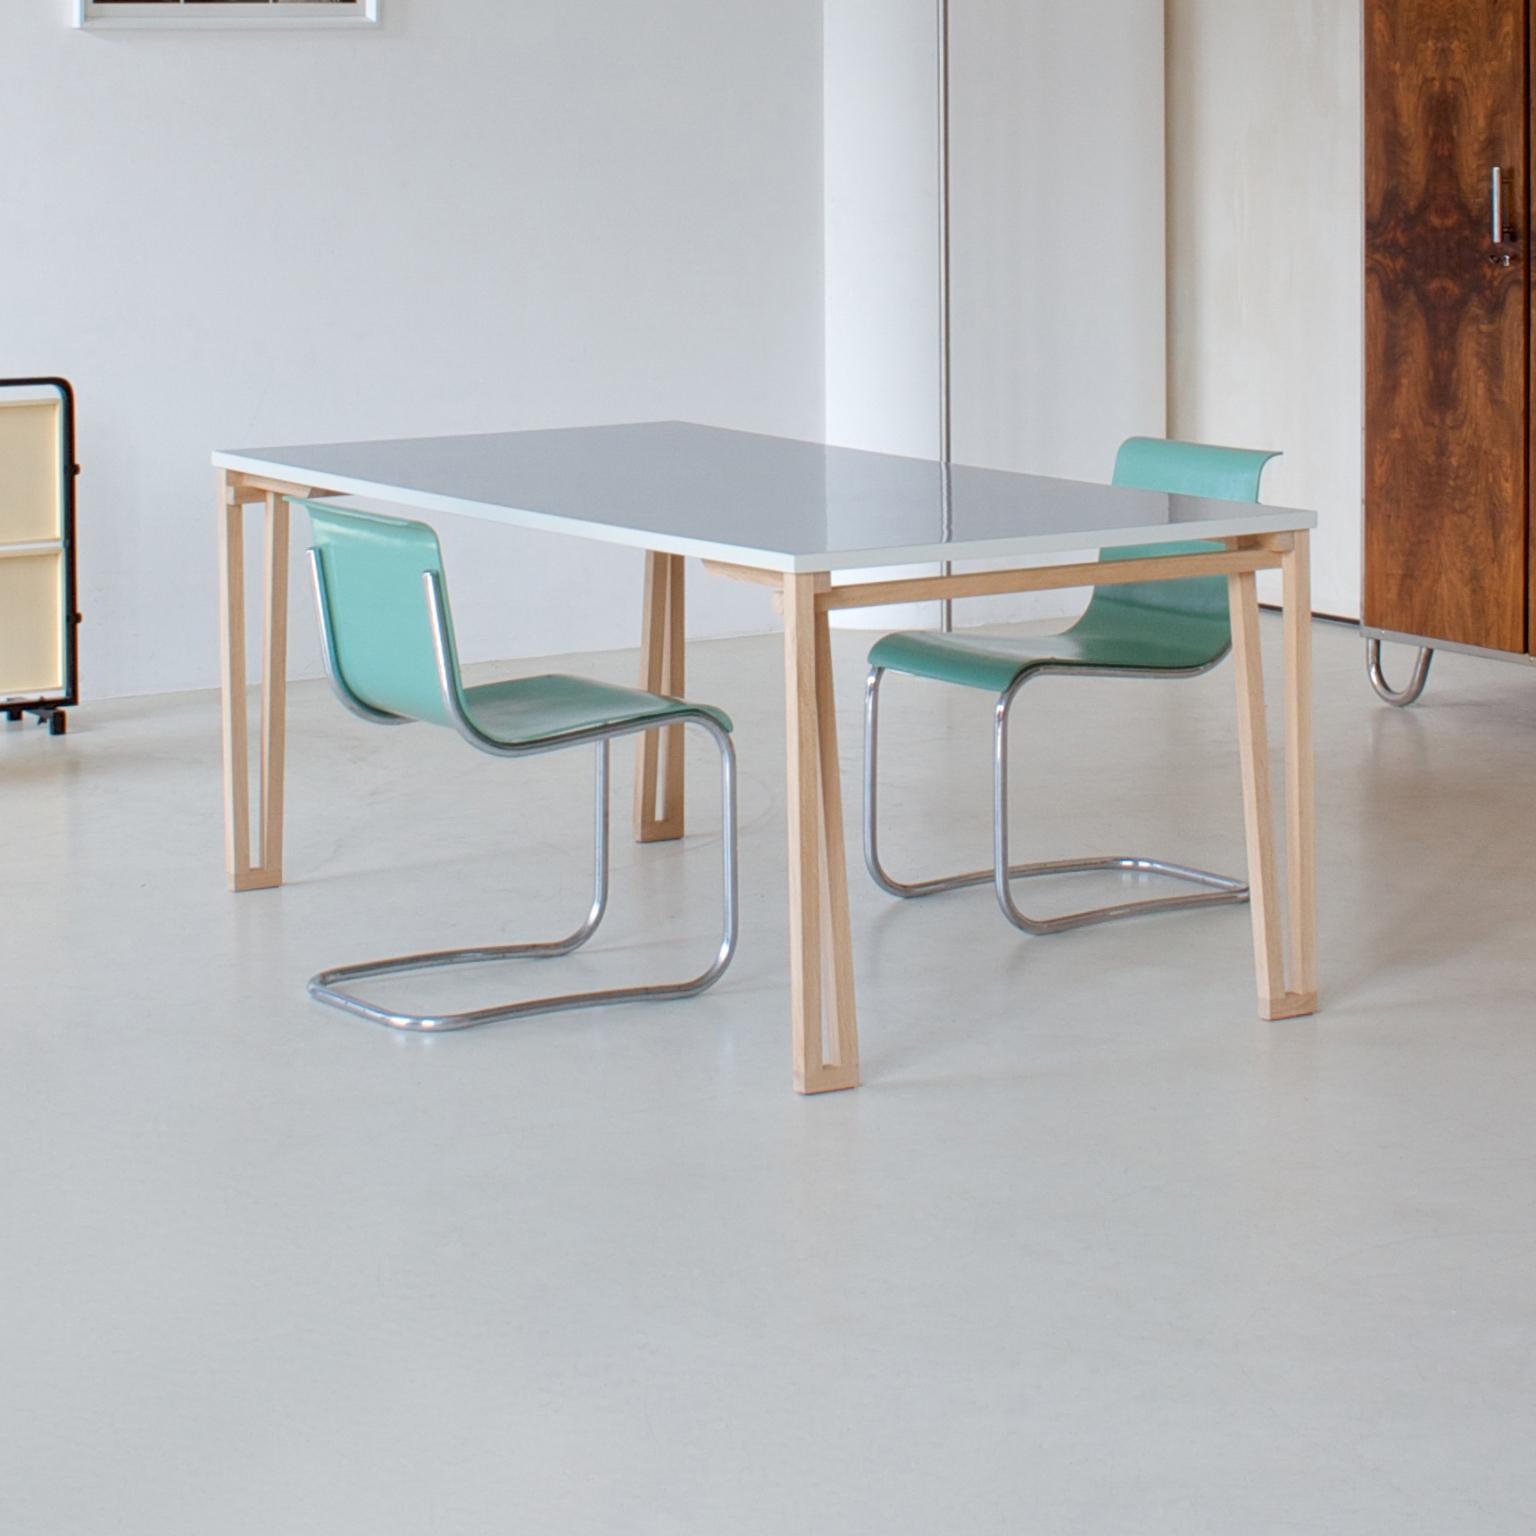 Modern contemporary handcrafted wooden table, manufactured by GMD Berlin, 2014.
Available on request in different wood types, dimension and finish. Delivery time c. 6-7 weeks.